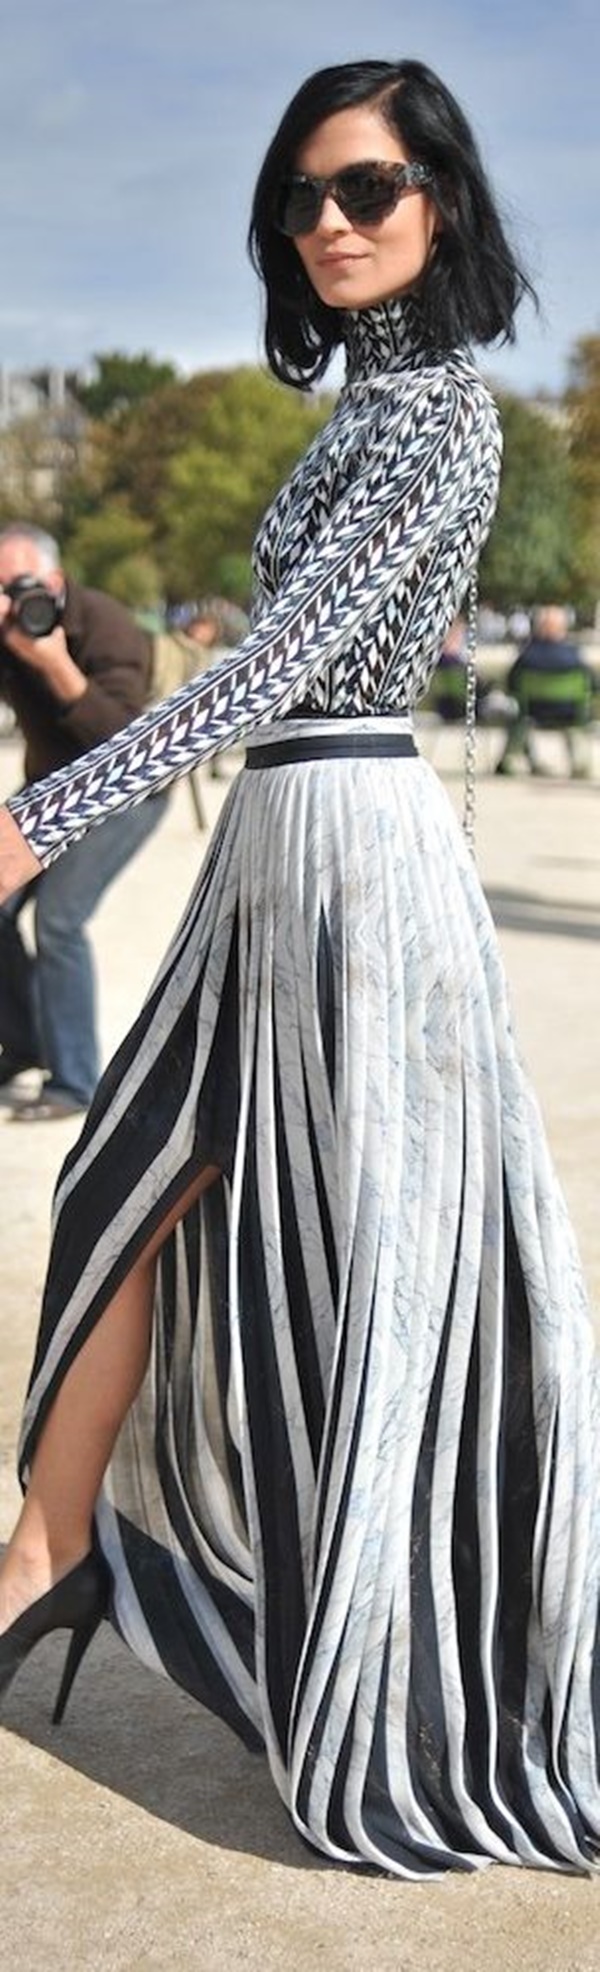 maxi skirt outfit (20)